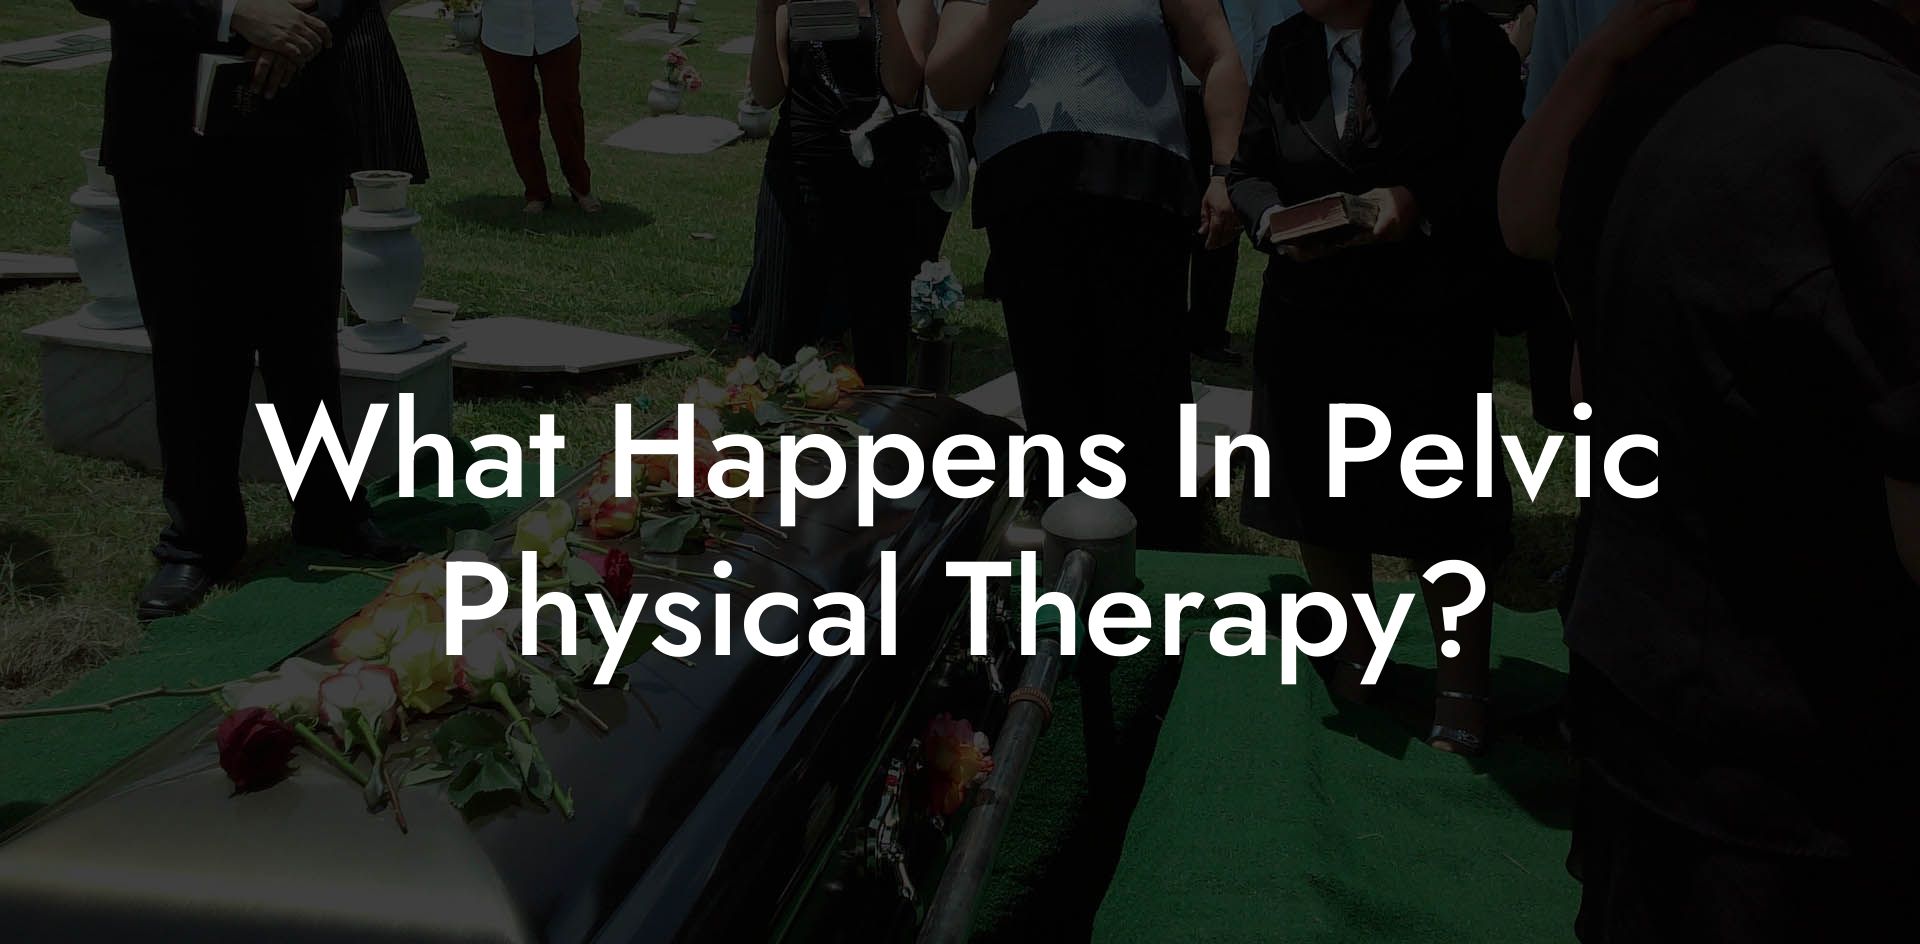 What Happens In Pelvic Physical Therapy?